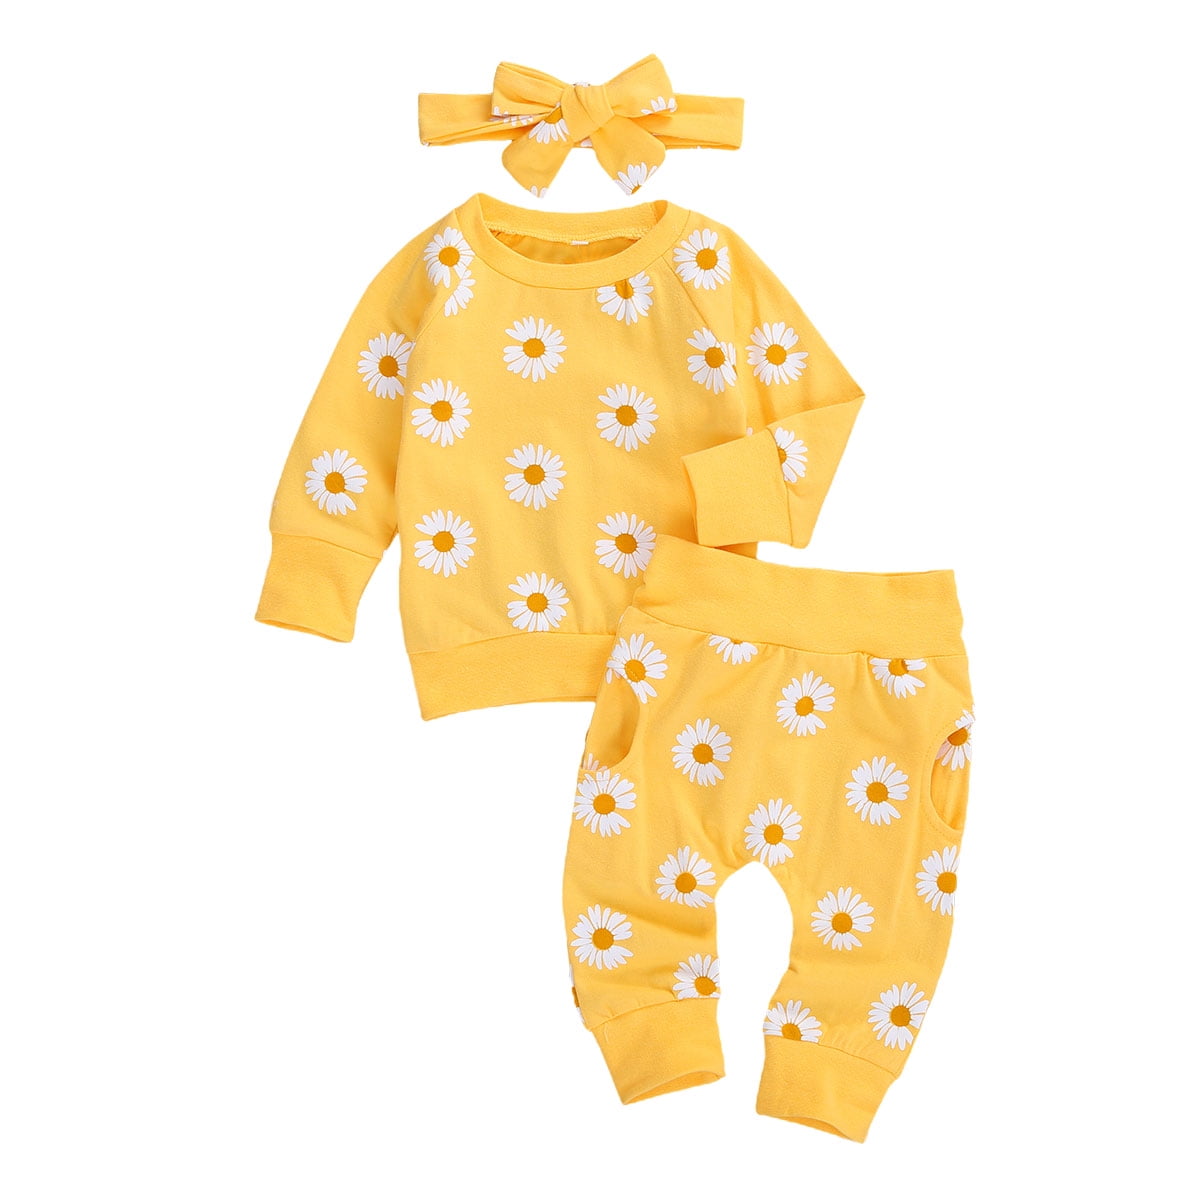 Newborn Baby Girl Floral Clothes Daisy Sweatshirt Top Trouser Headband Sweatsuit 3Pcs Infant Toddler Outfit Set